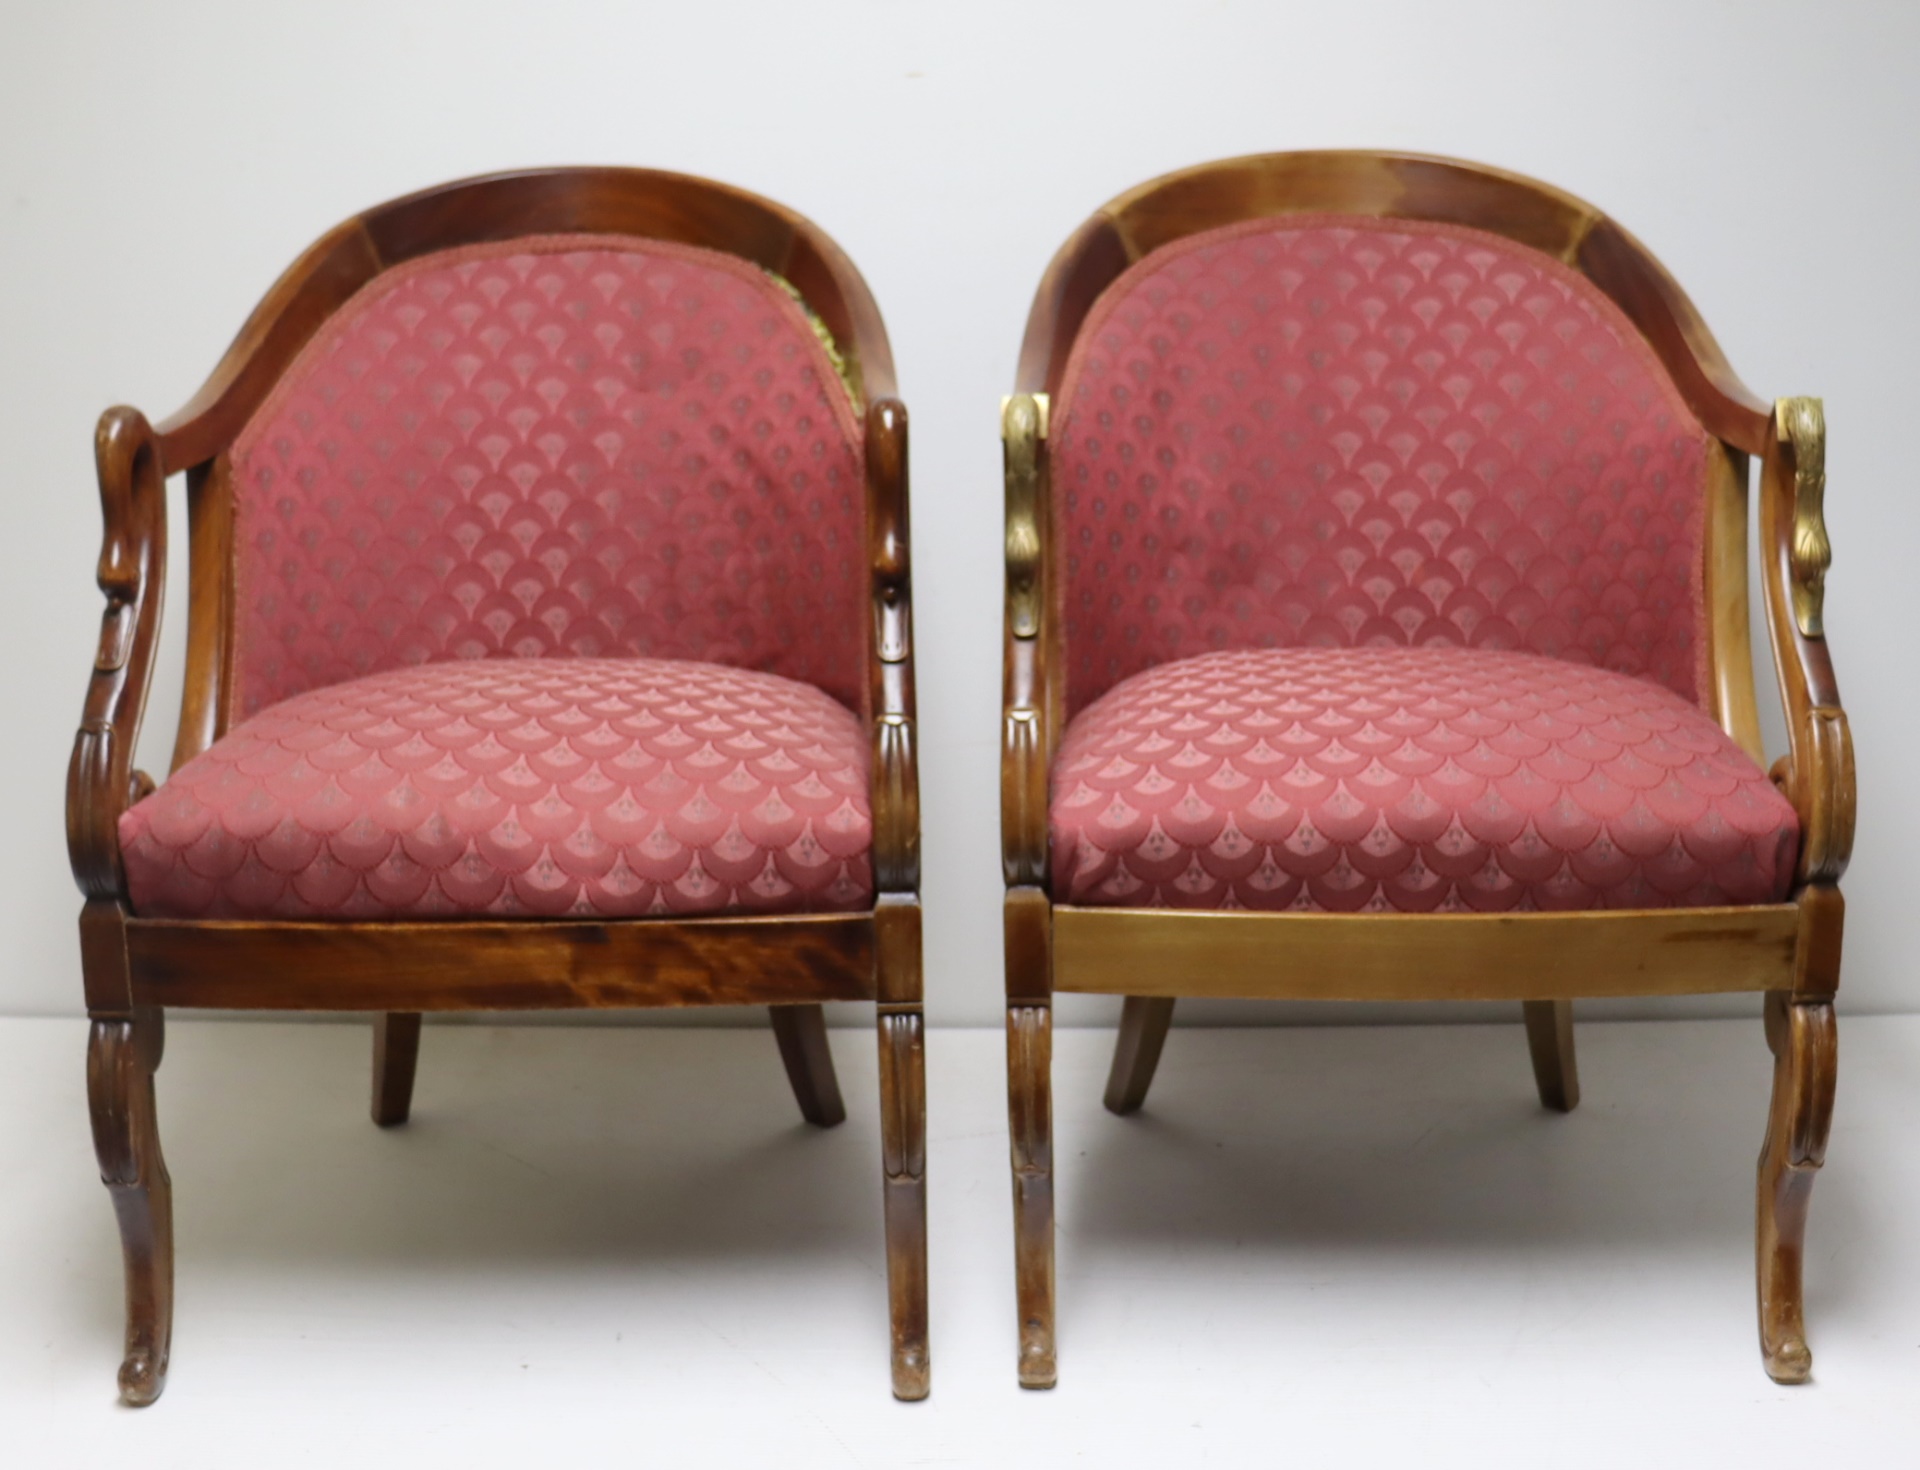 A PAIR OF ANTIQUE FRENCH CHAIRS